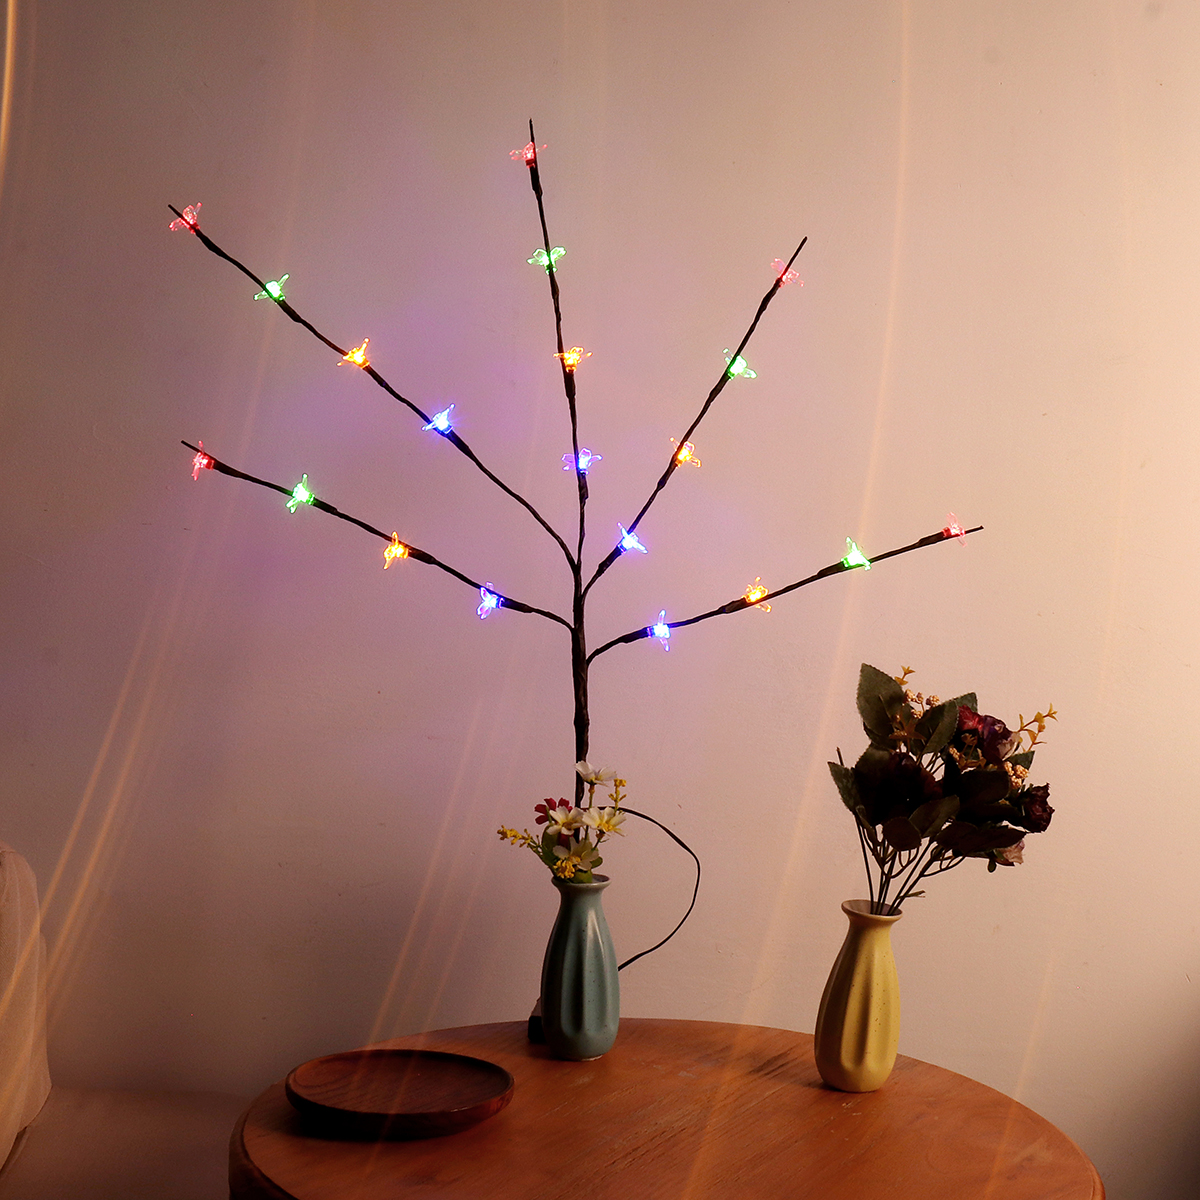 70CM-Battery-Powered-20LED-Cherry-Blossoms-Branch-Tree-Fairy-String-Light-Christmas-Home-Party-Decor-1378731-3